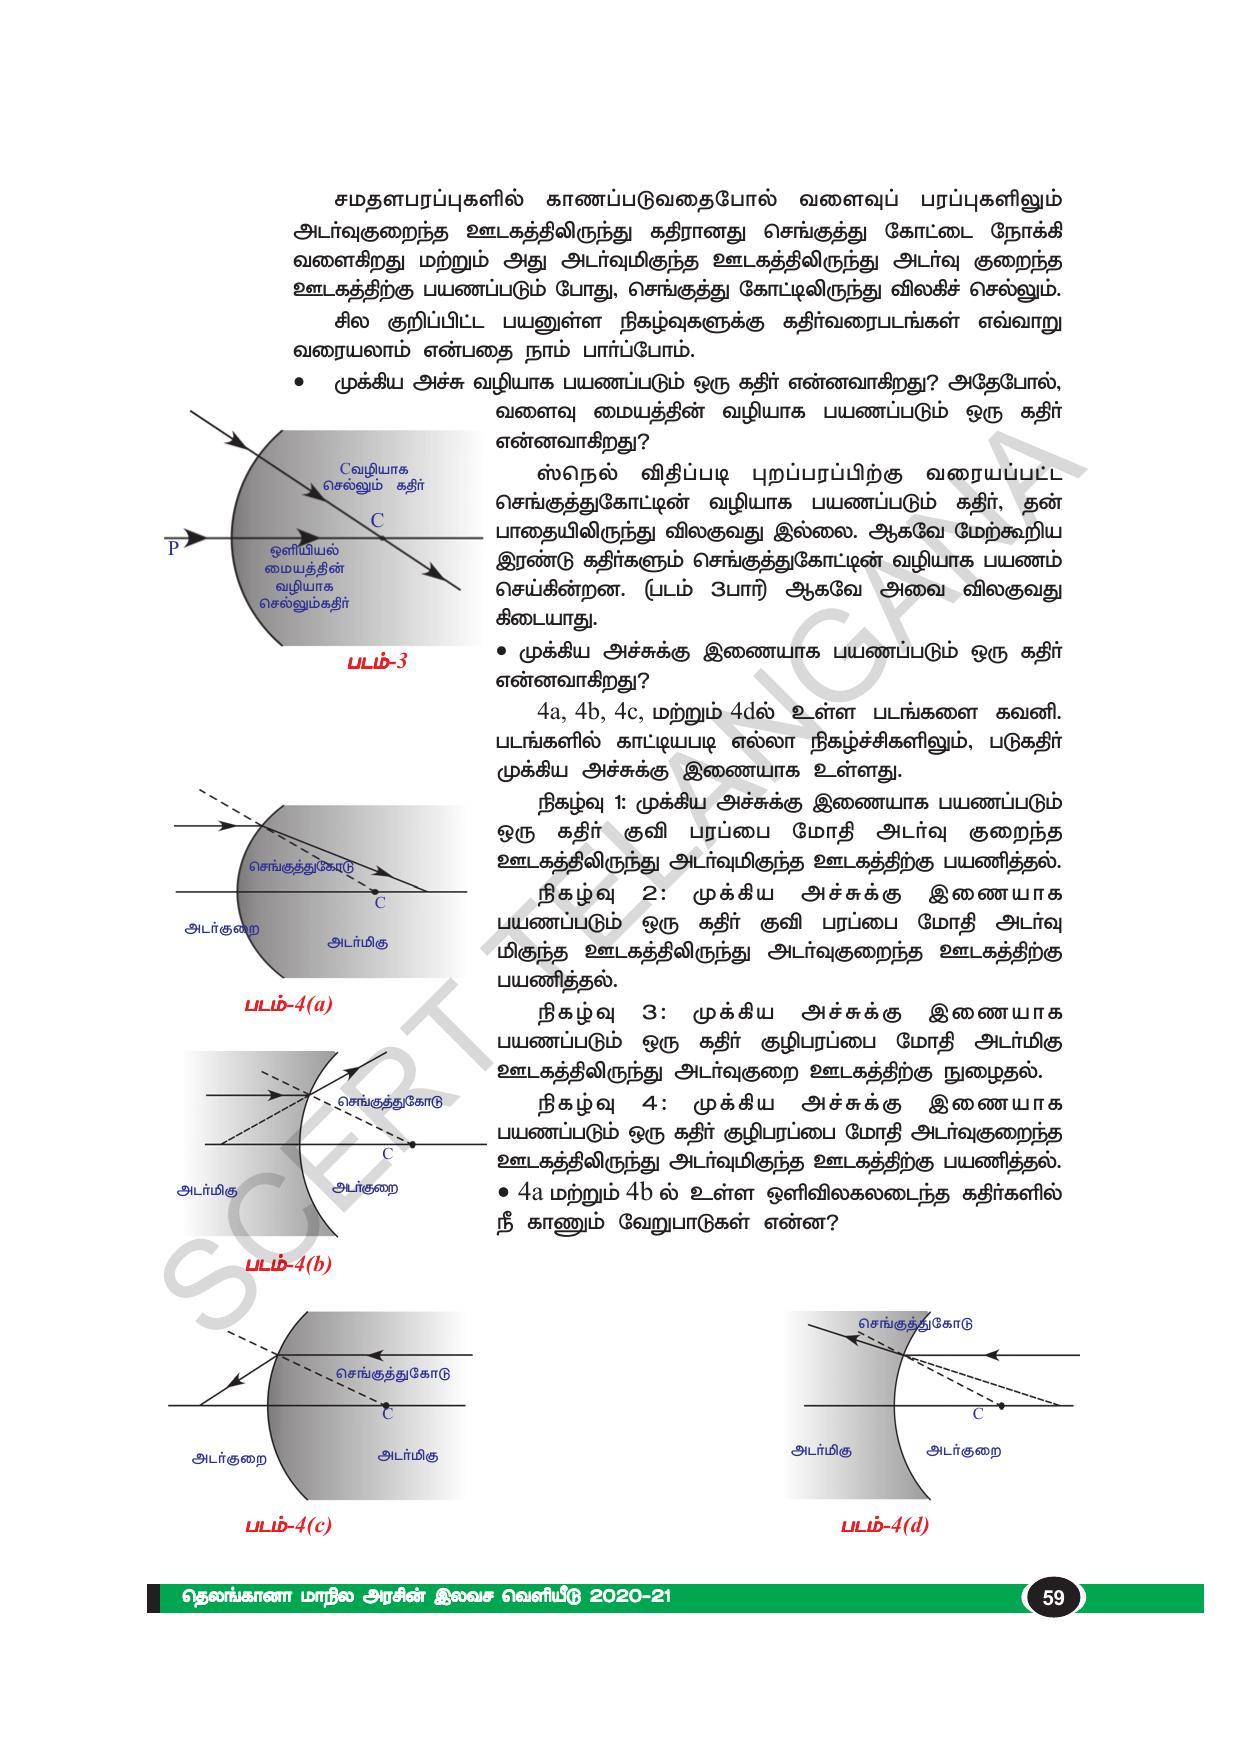 TS SCERT Class 10 Physical Science(Tamil Medium) Text Book - Page 71